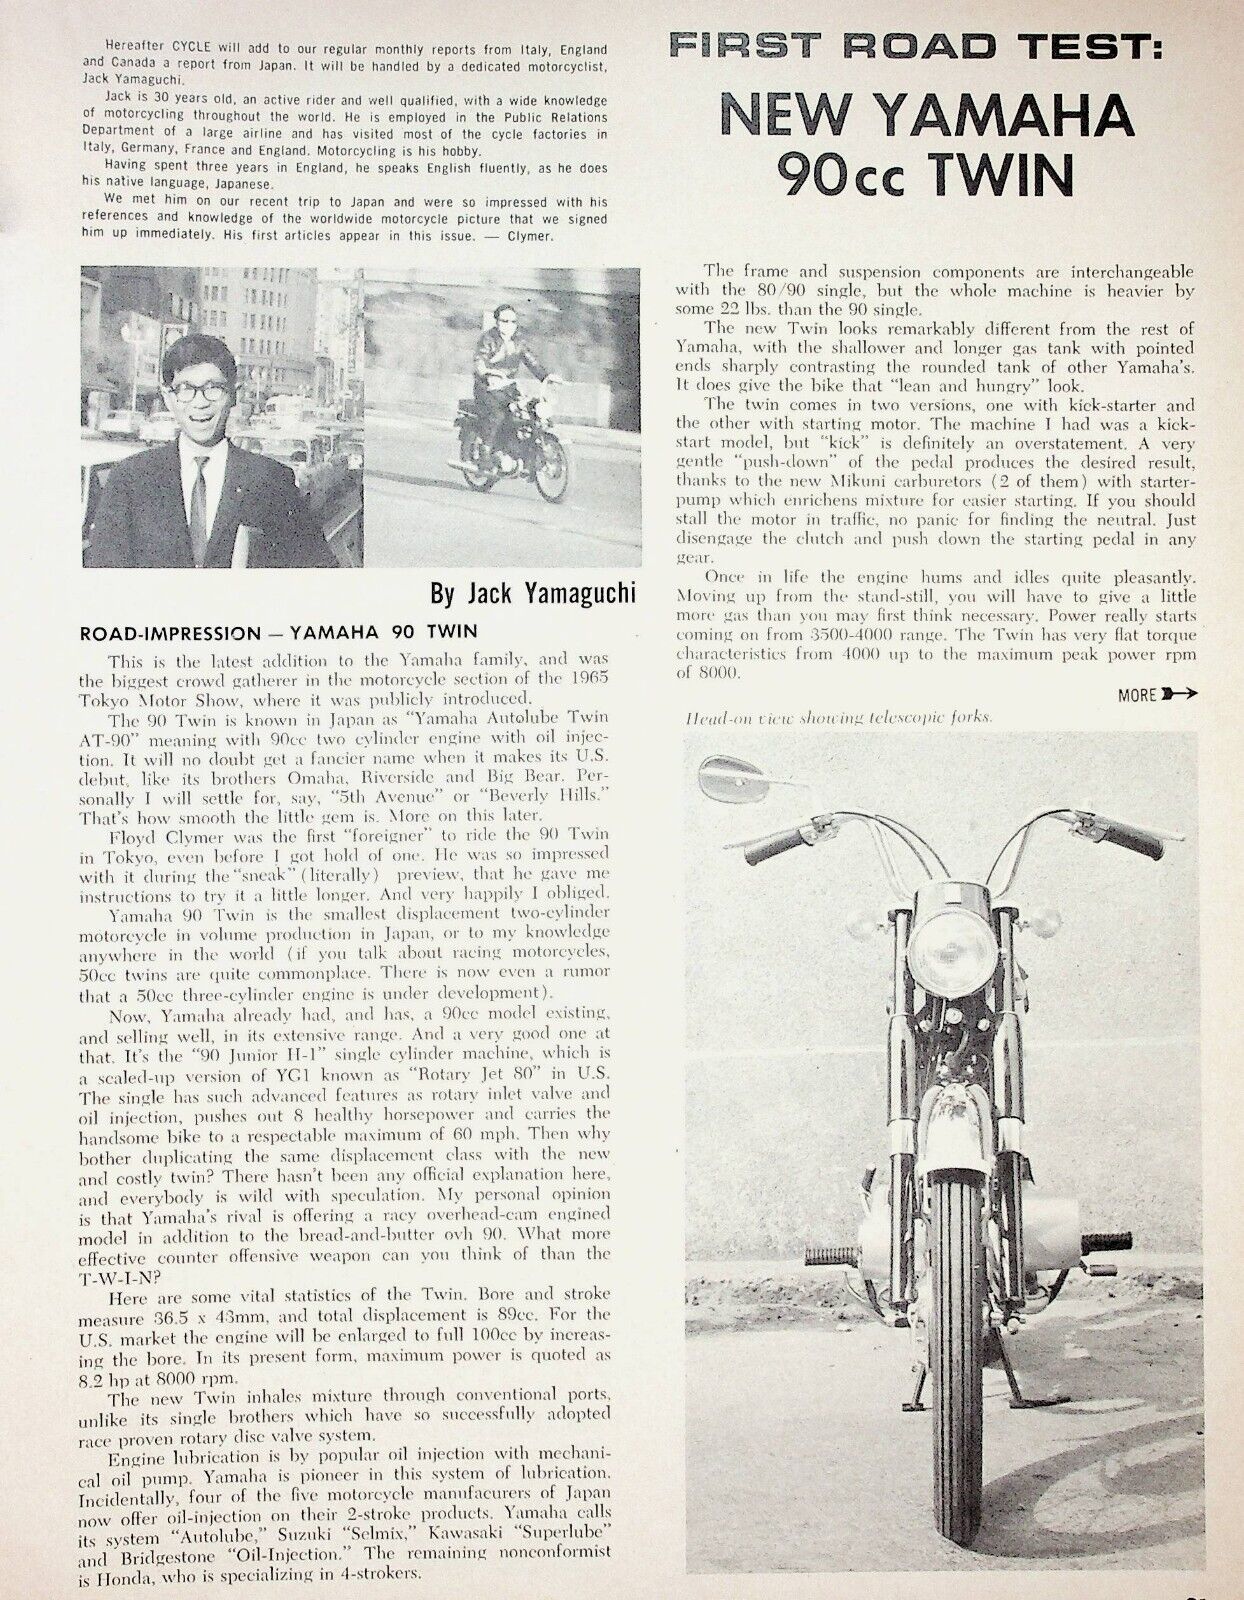 1966 Yamaha 90 Twin Motorcycle - 2-Page Vintage Road Test Article